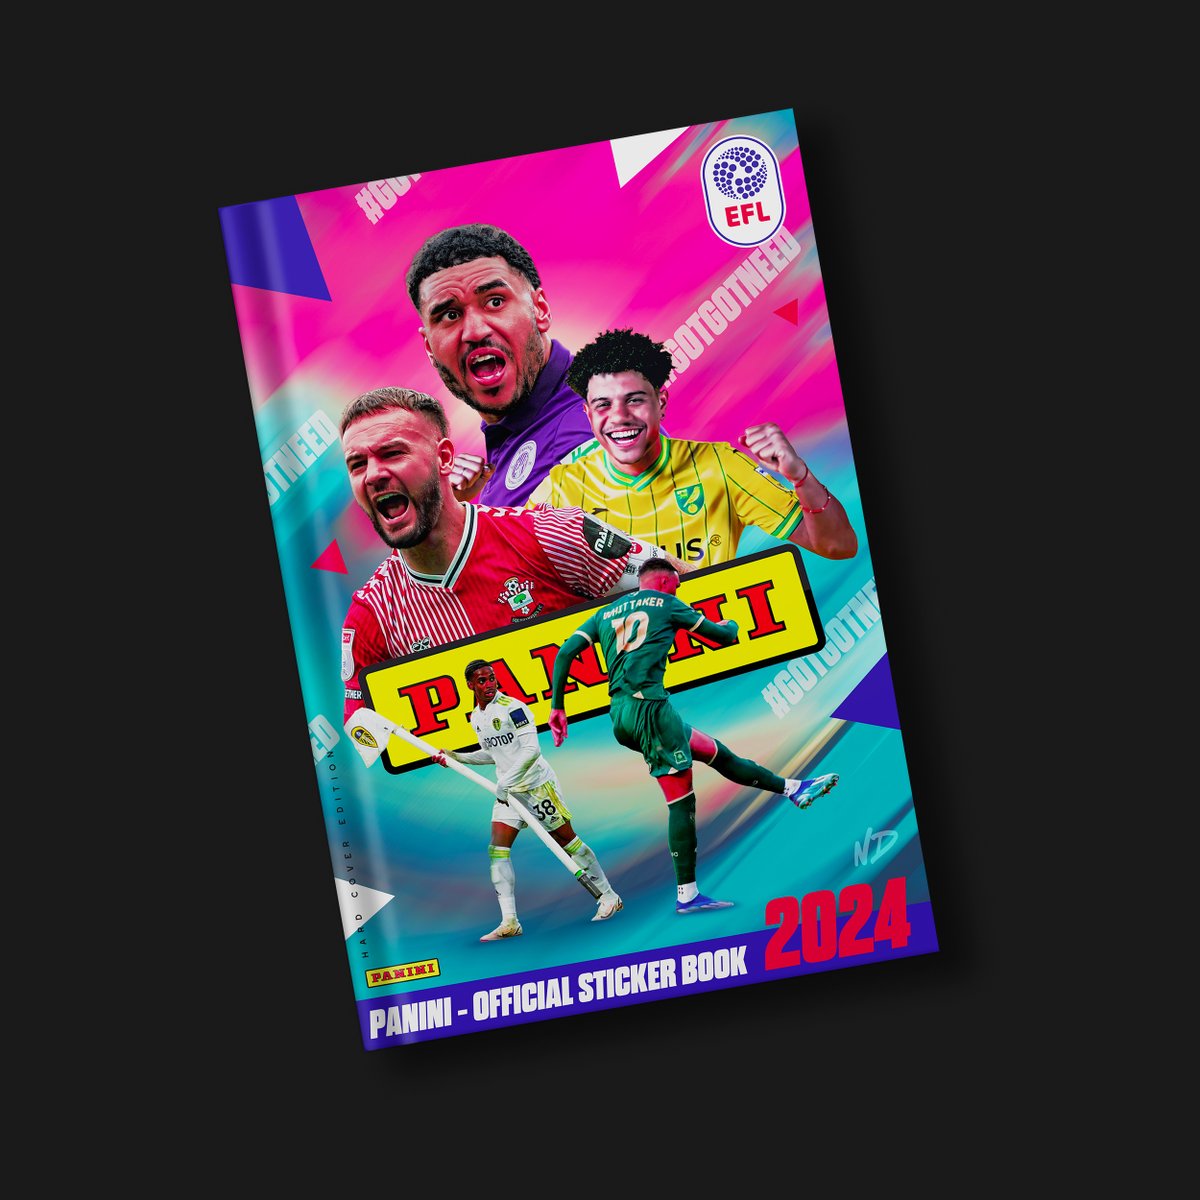 Had fun making this one, if Panini made a sticker book for the EFL.

#EFL #TradingCards #sportsdesign